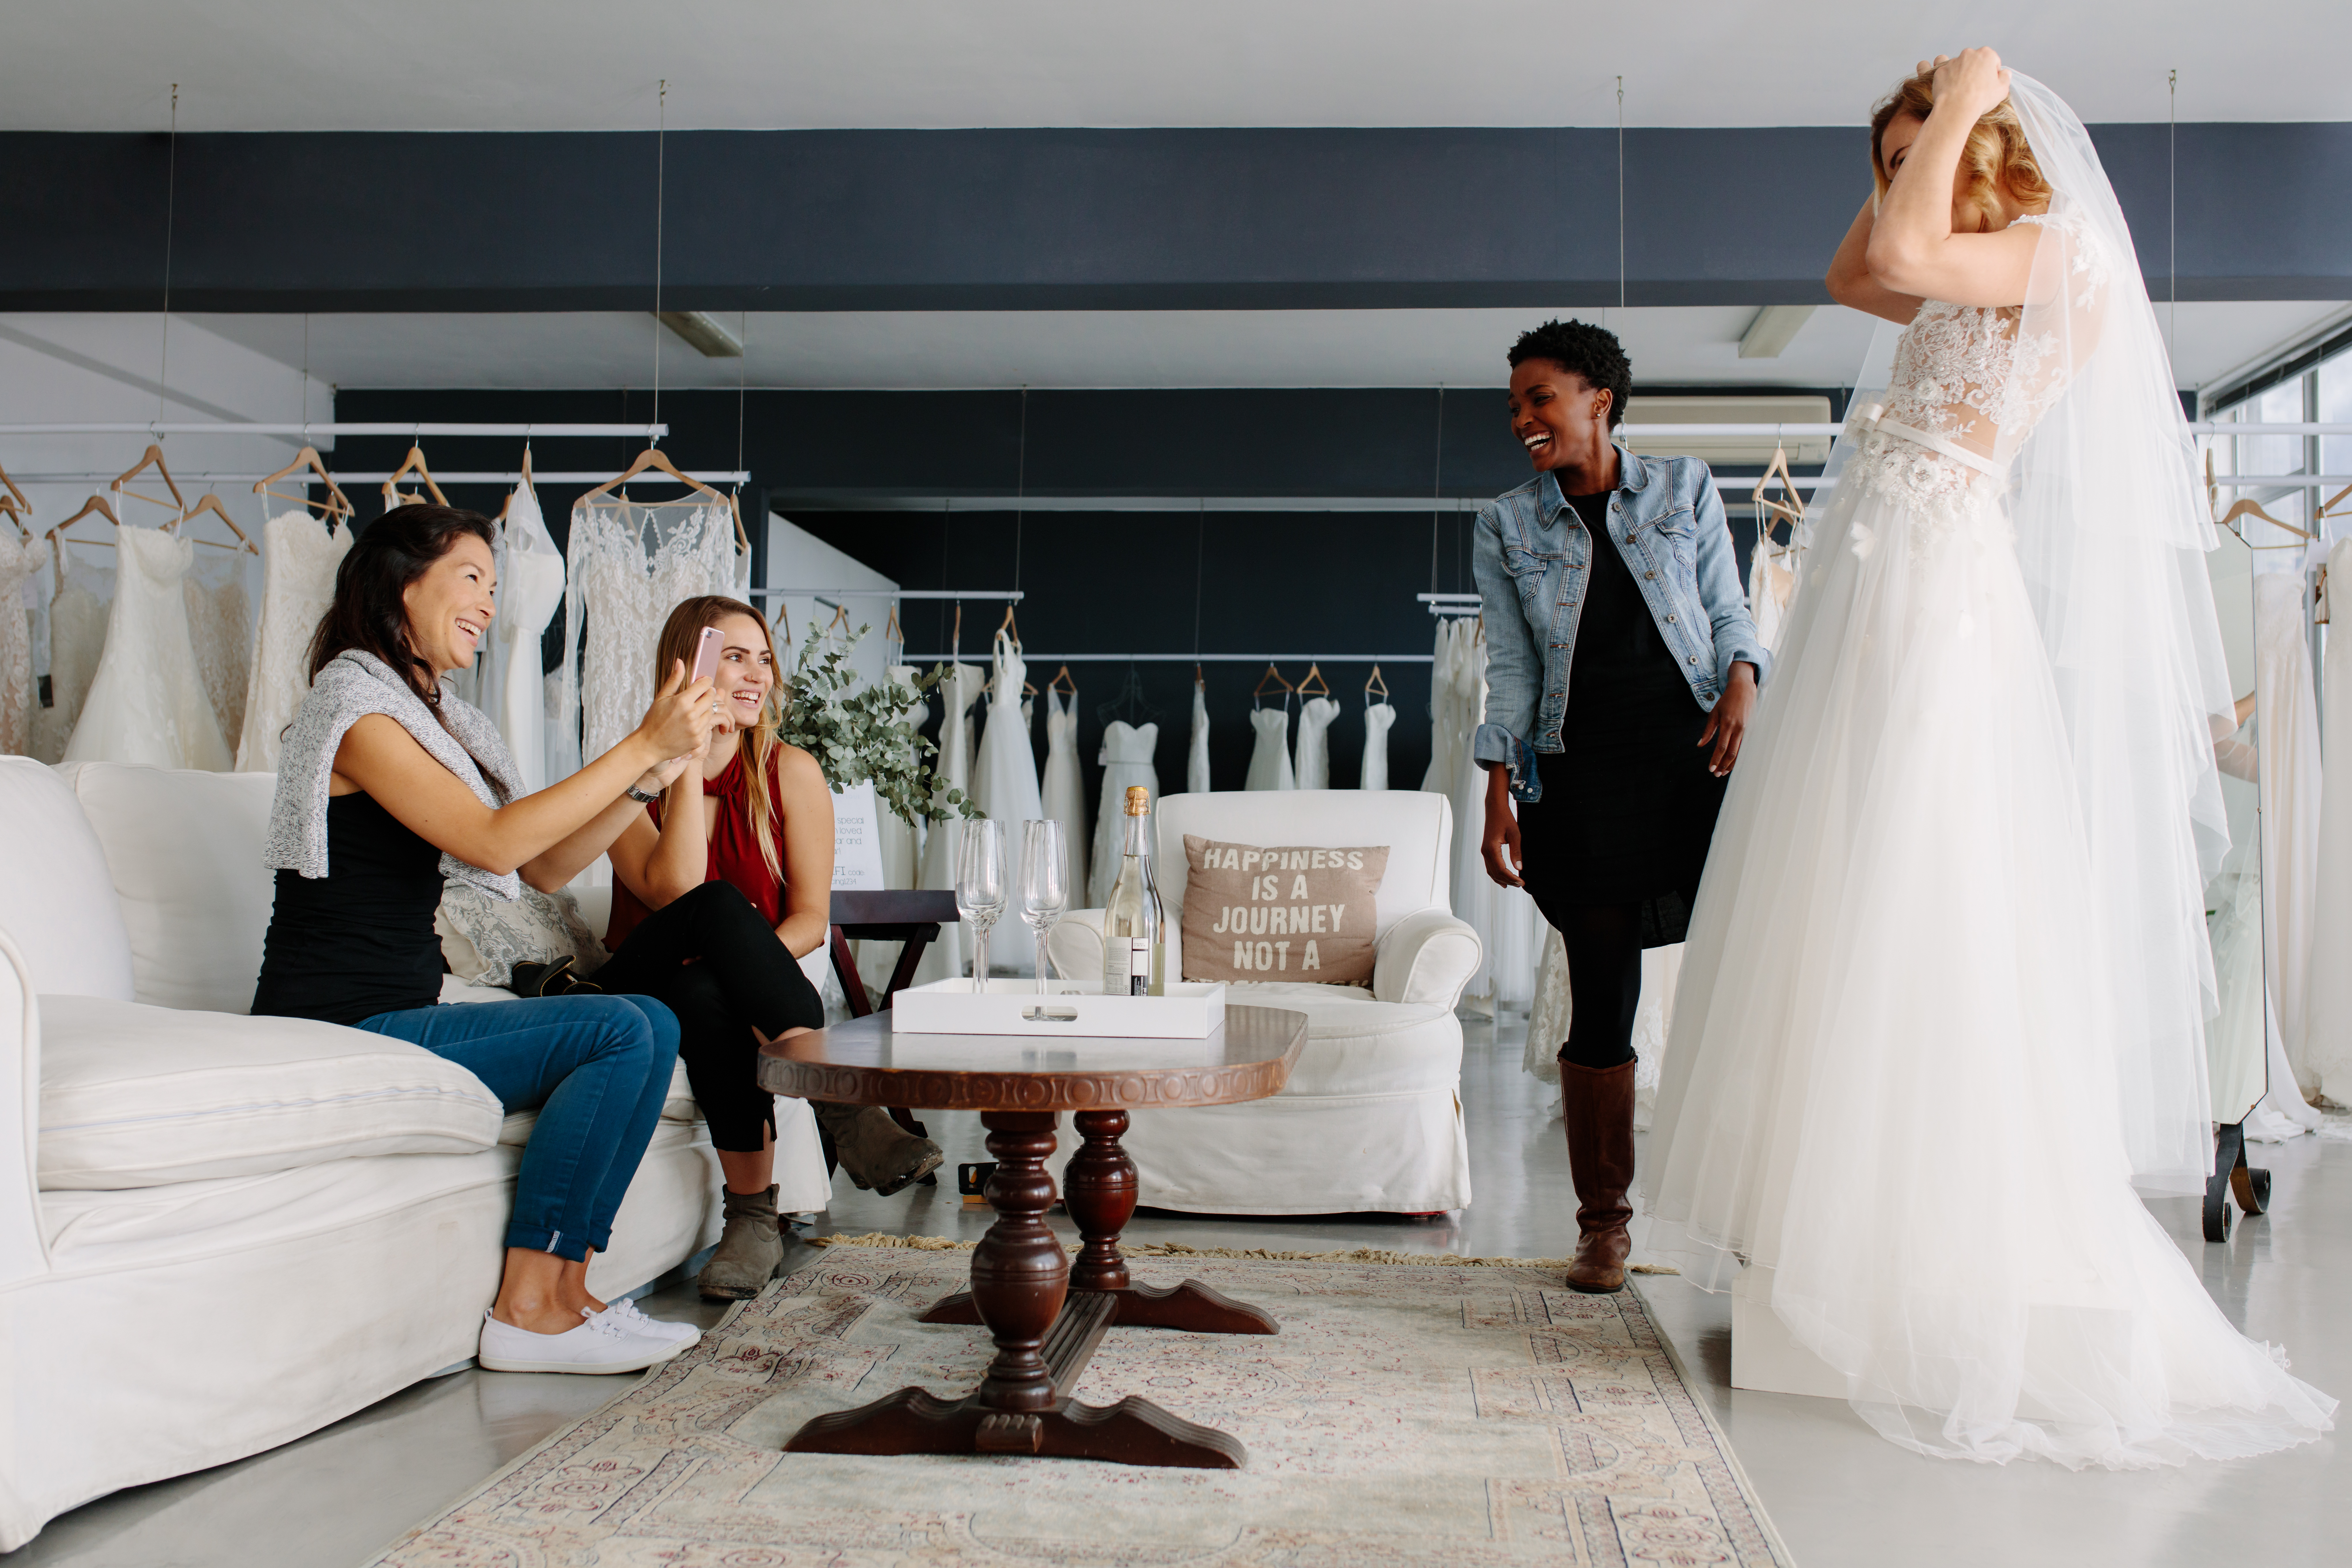 A woman trying on a wedding dress surrounded by her friends | Source: Shutterstock